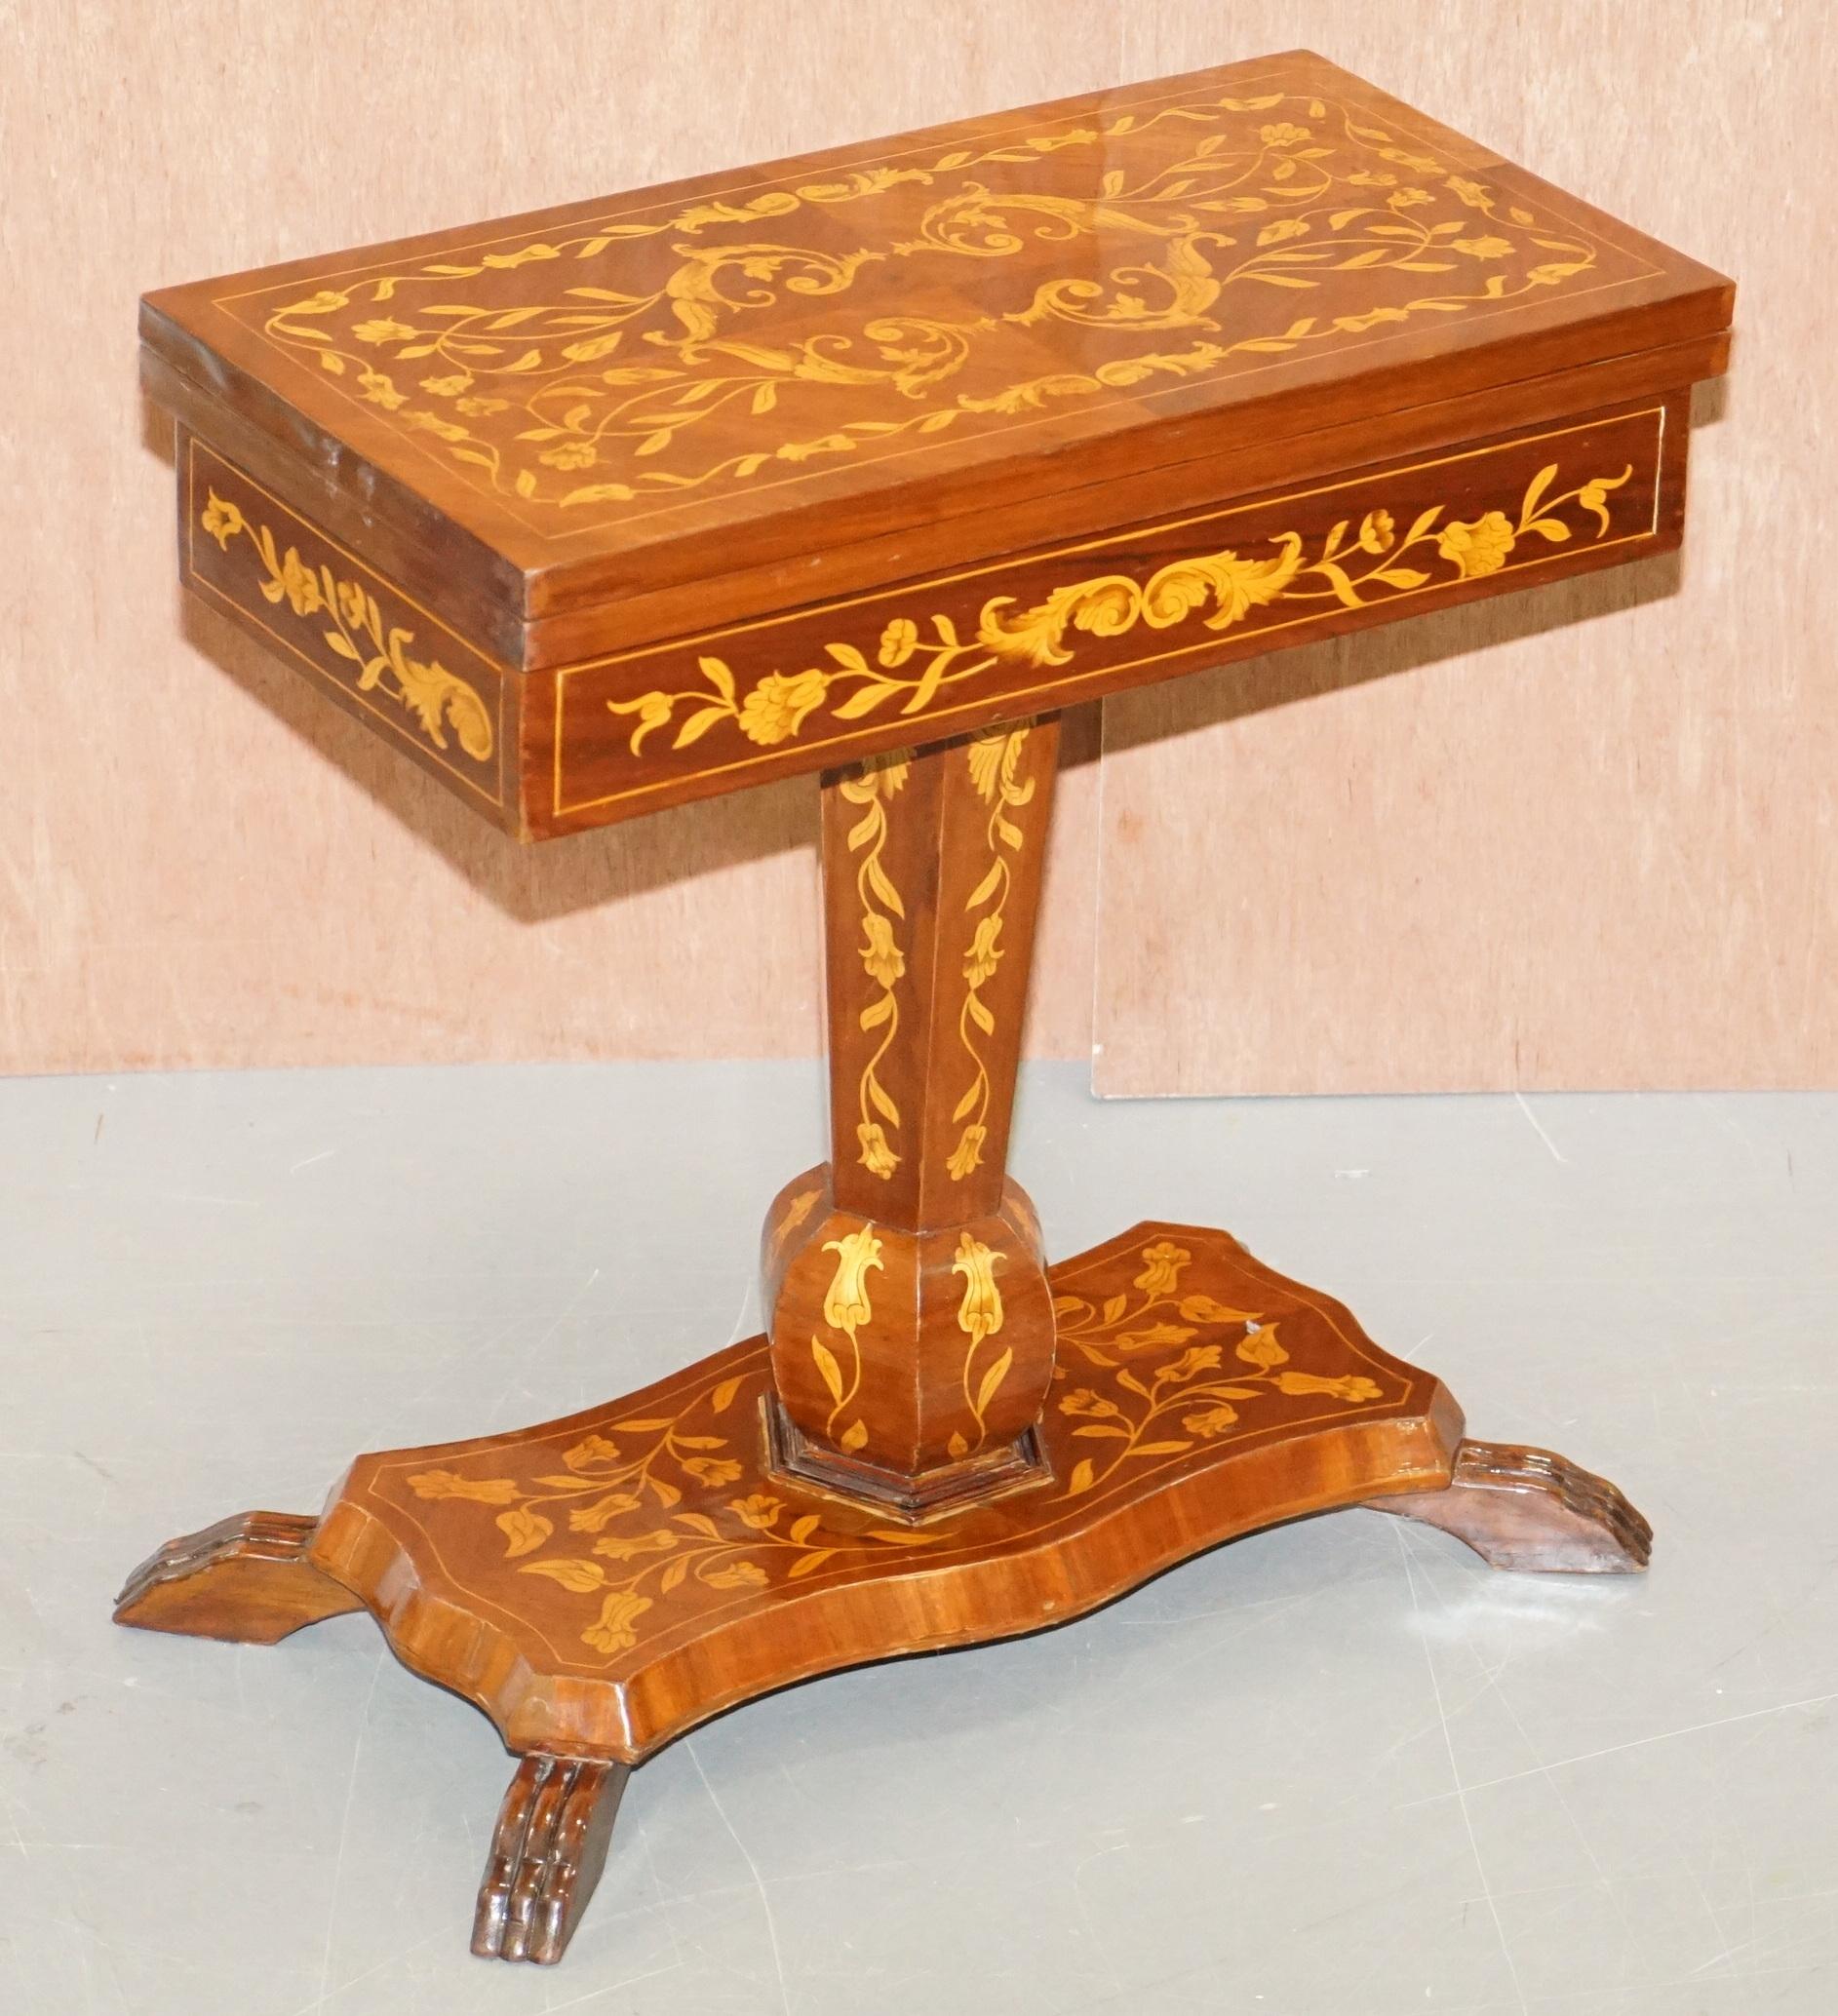 We are delighted to offer this very well made late 19th century Dutch Marquetry inlaid folding games card table with chessboard top

To confirm this listing is for one table, I have pictured it above with the top open and closed so you can see